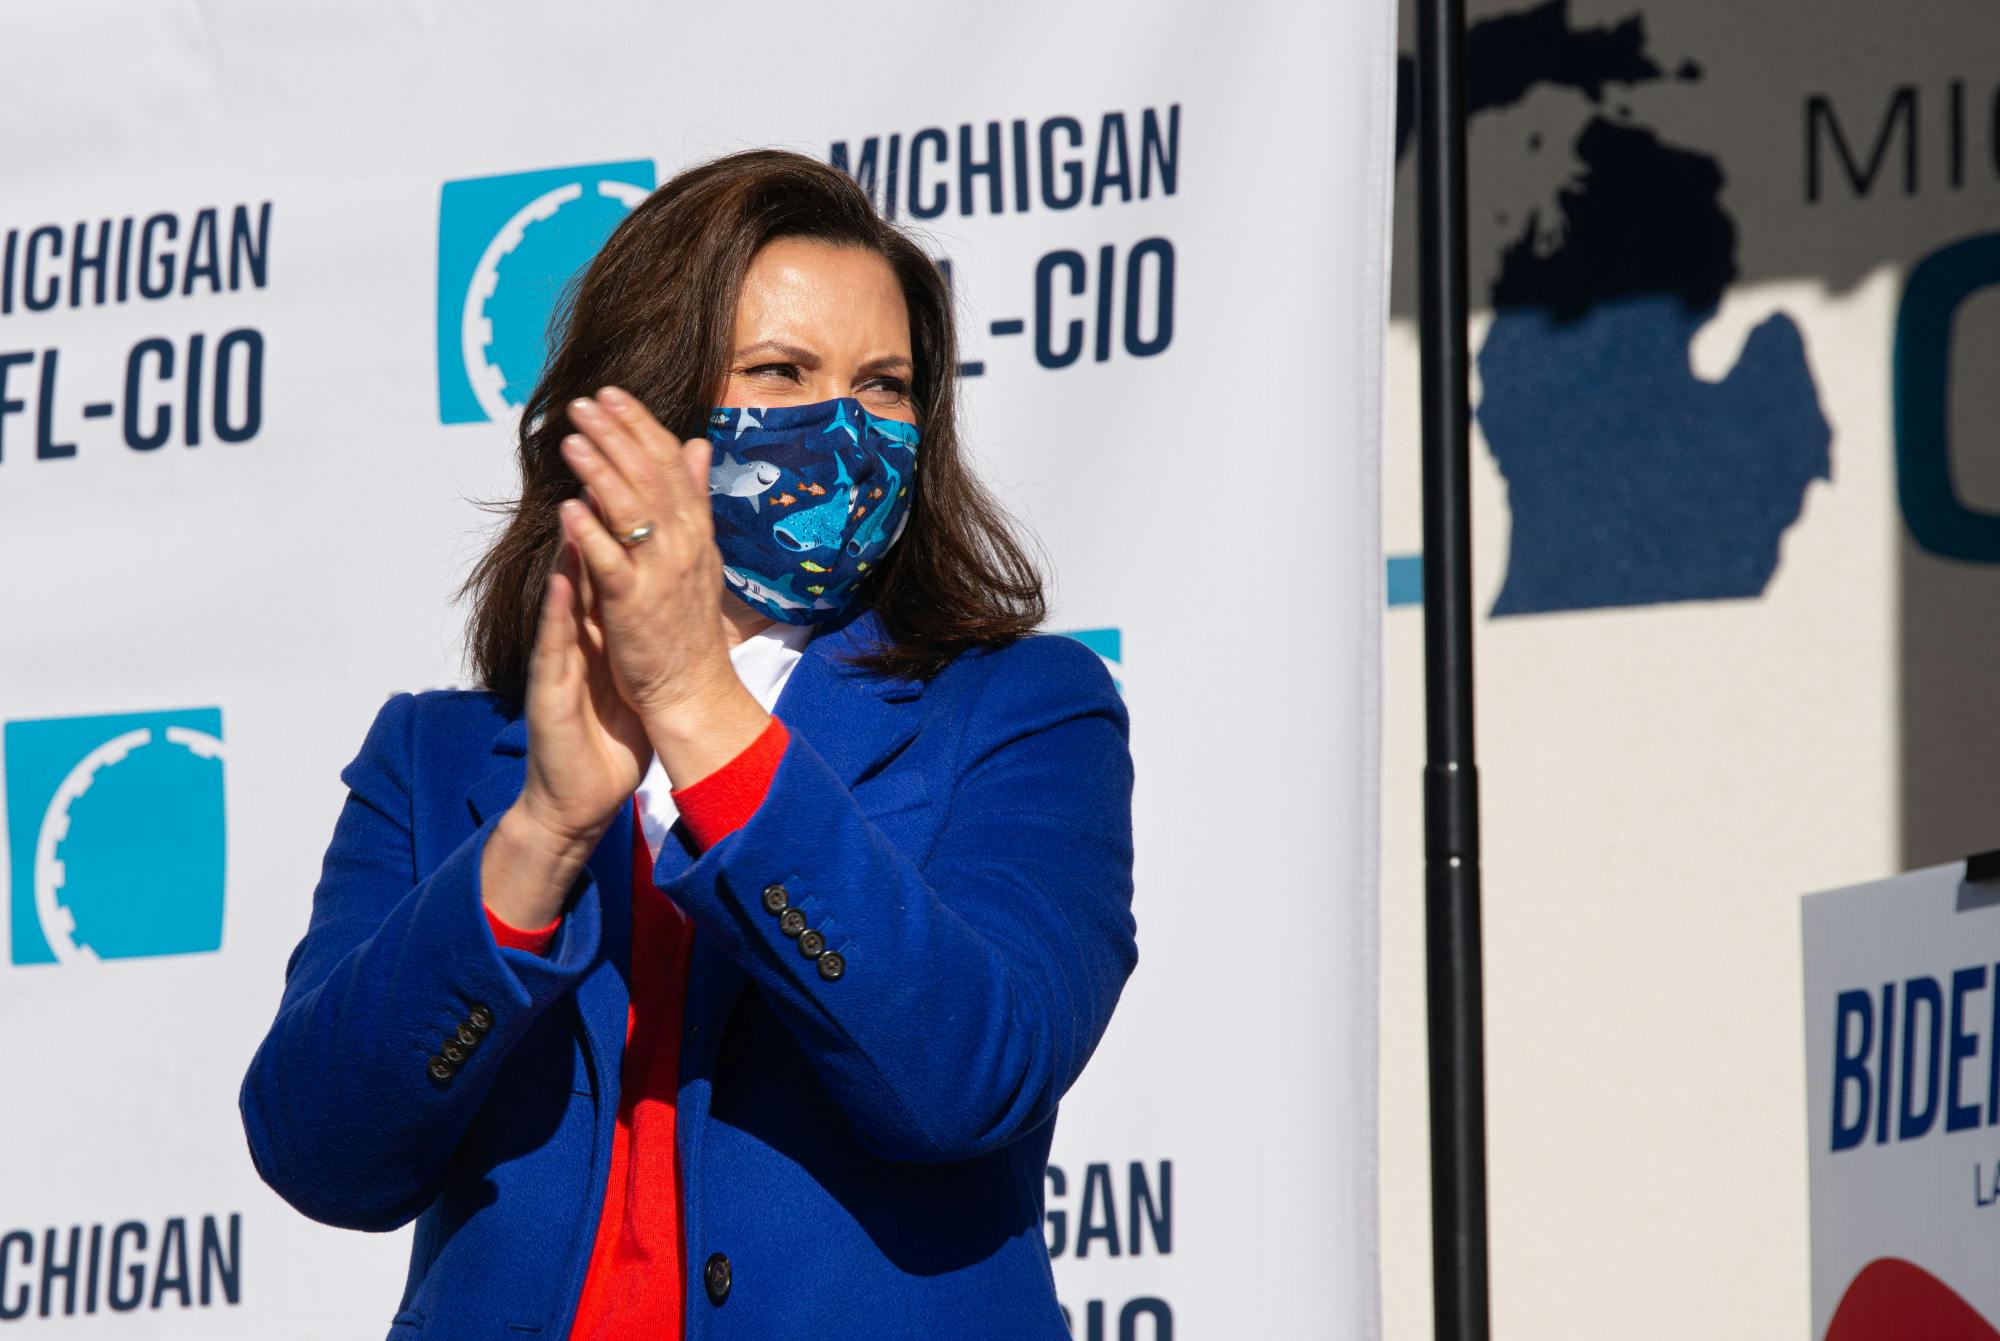 <p>Gov. Gretchen Whitmer applauds at a canvass launch event in Lansing, Michigan, on Nov. 3, 2020.</p>